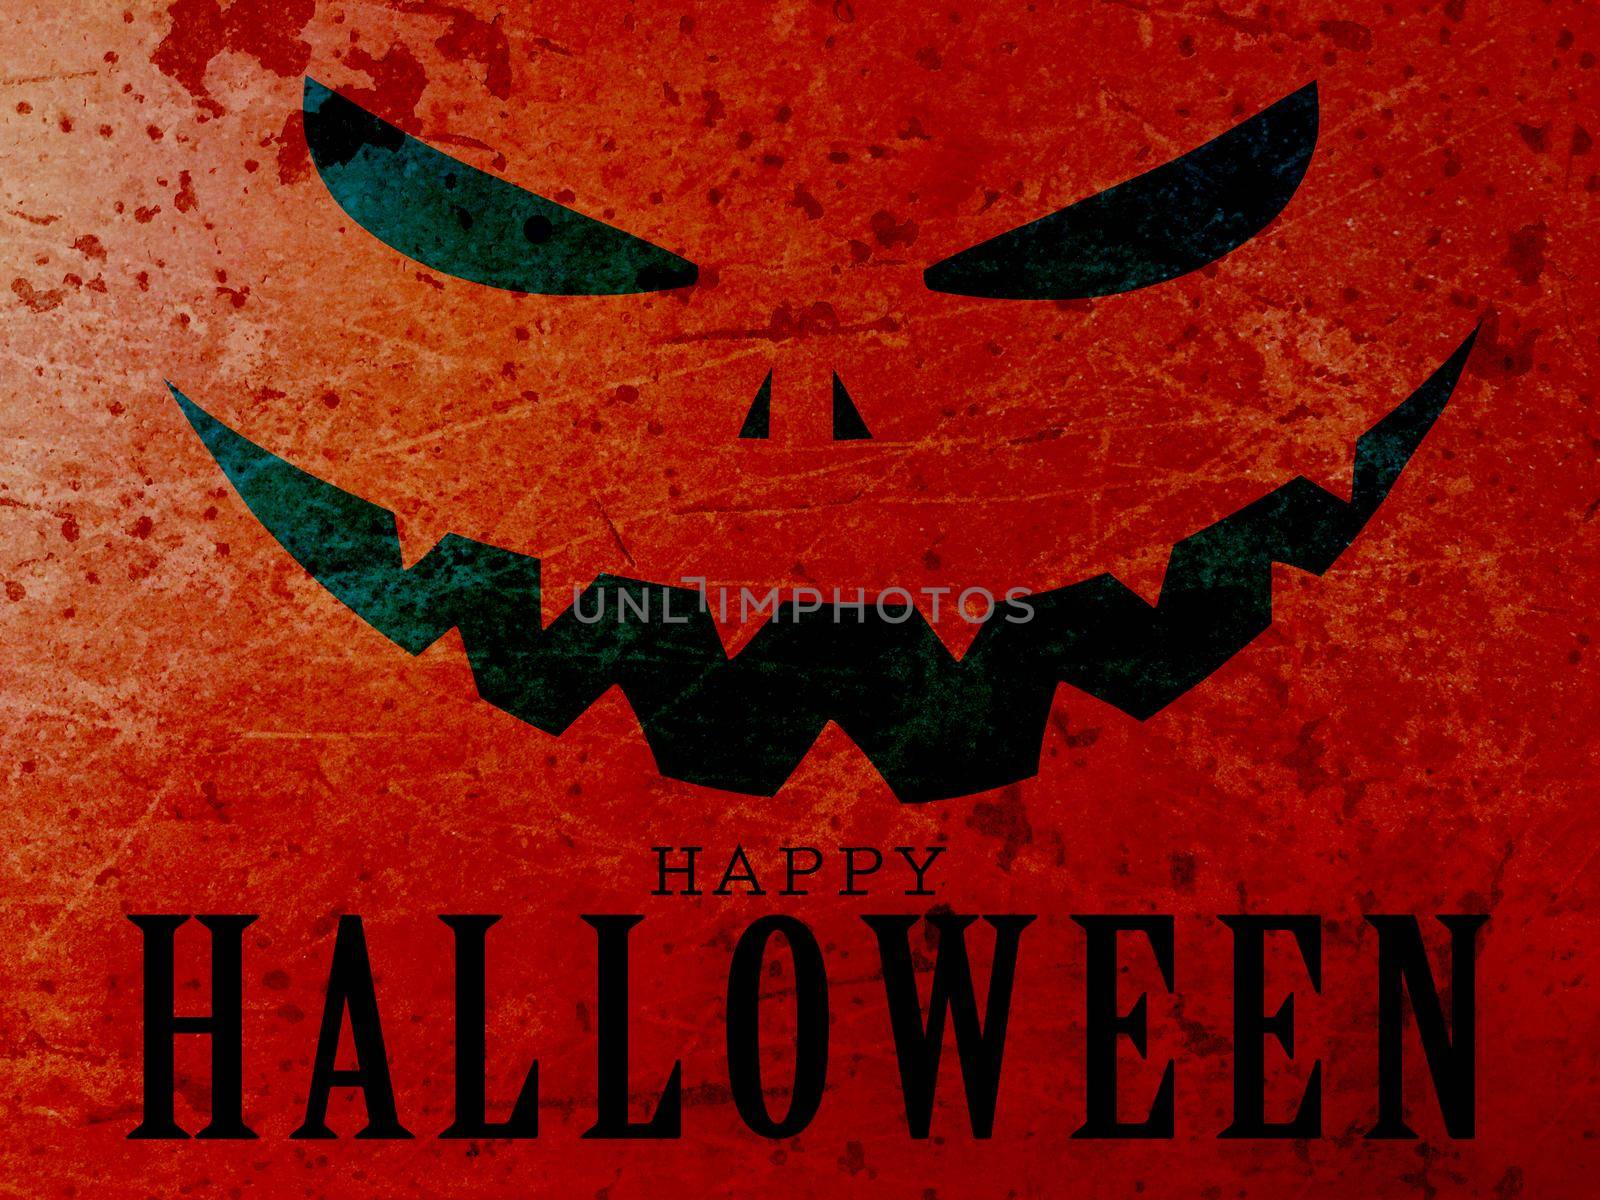 Happy Halloween monster face background illustration by Yoopho